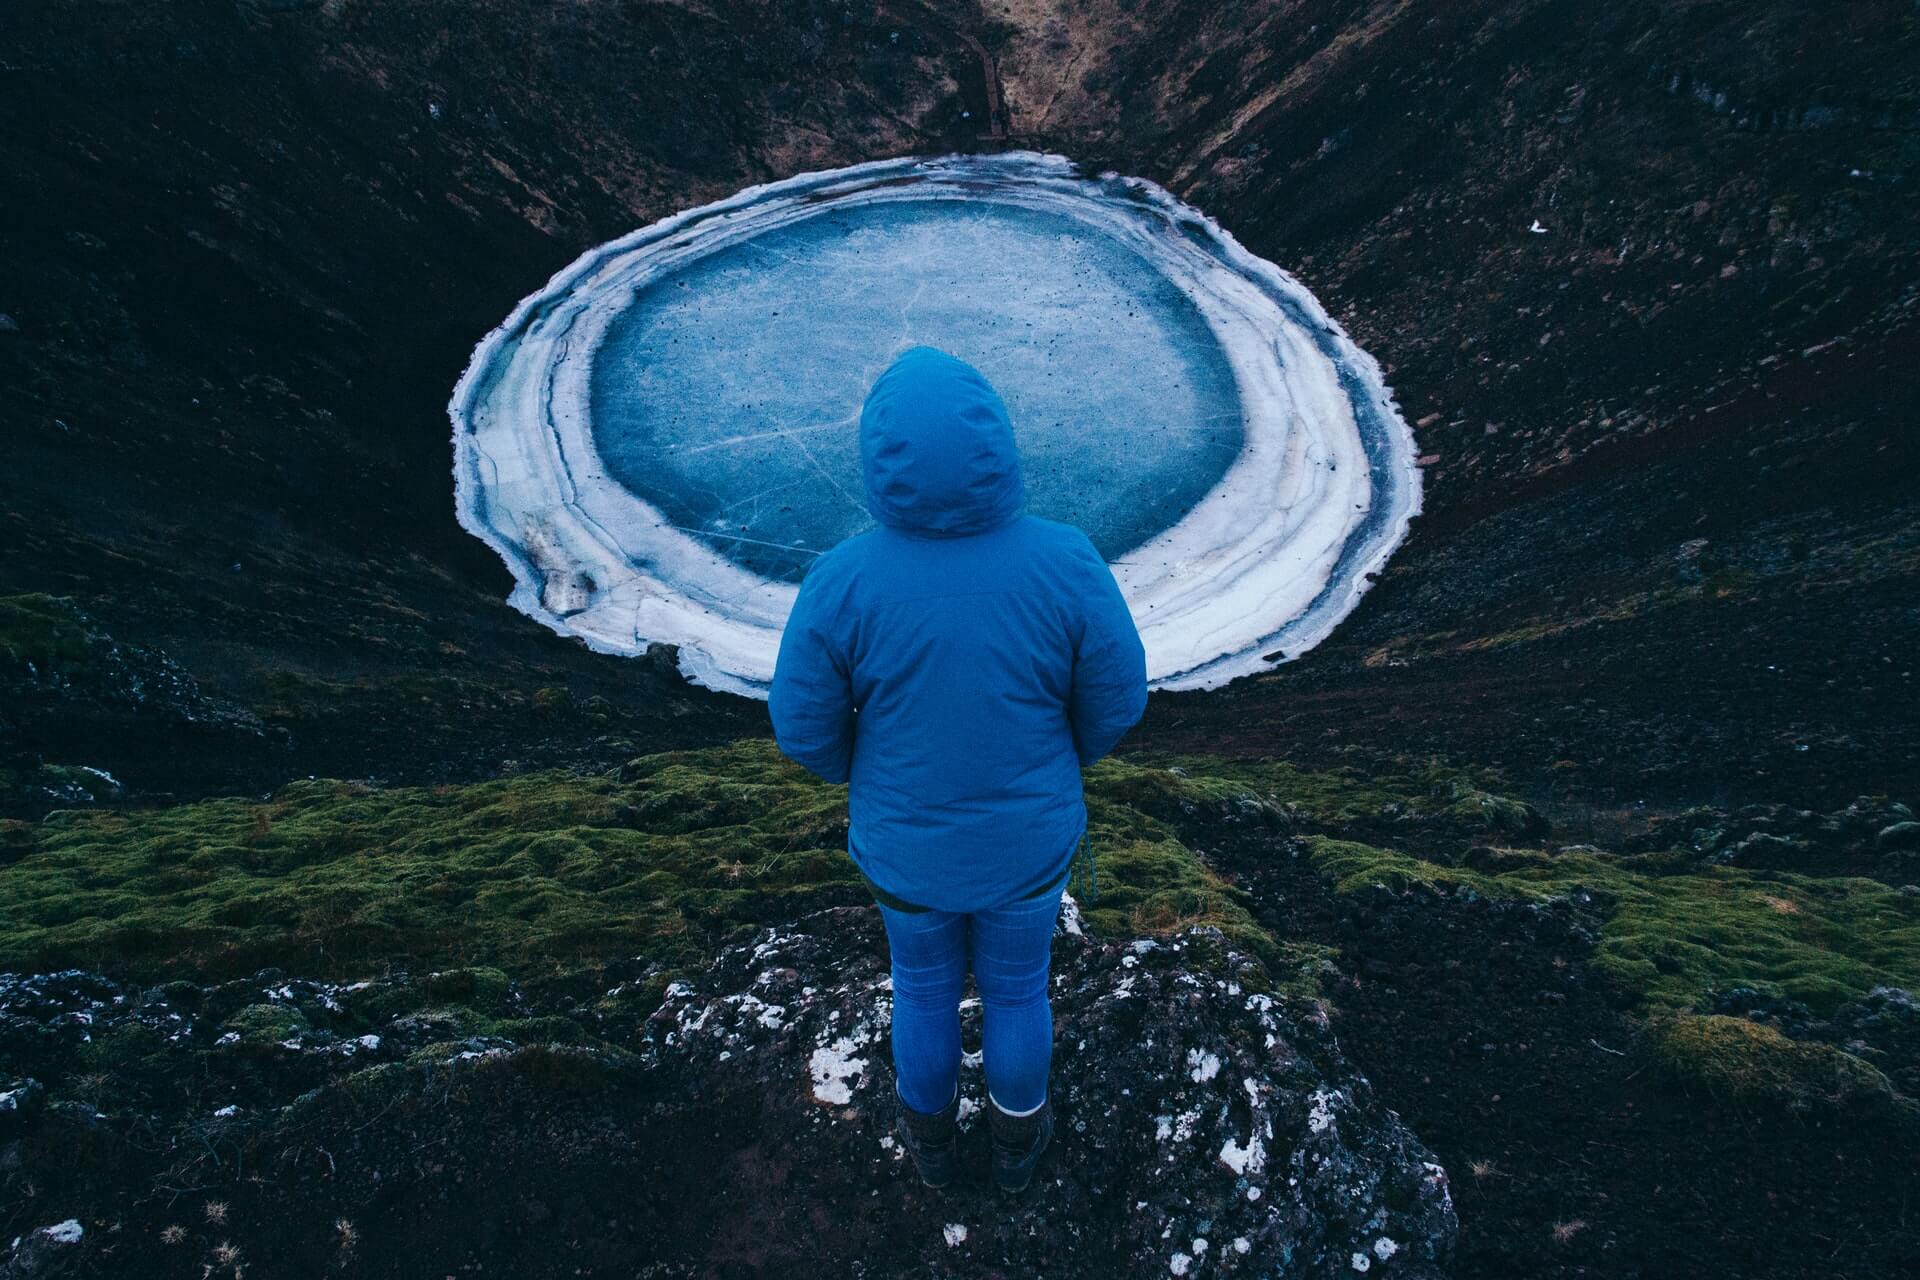 An aerial photograph of the Kerid Crater frozen in winter. The icy blue water stands out vividly against the dark volcanic rock. A person in a blue winter jacket stands with their back to the camera, overlooking the water. 